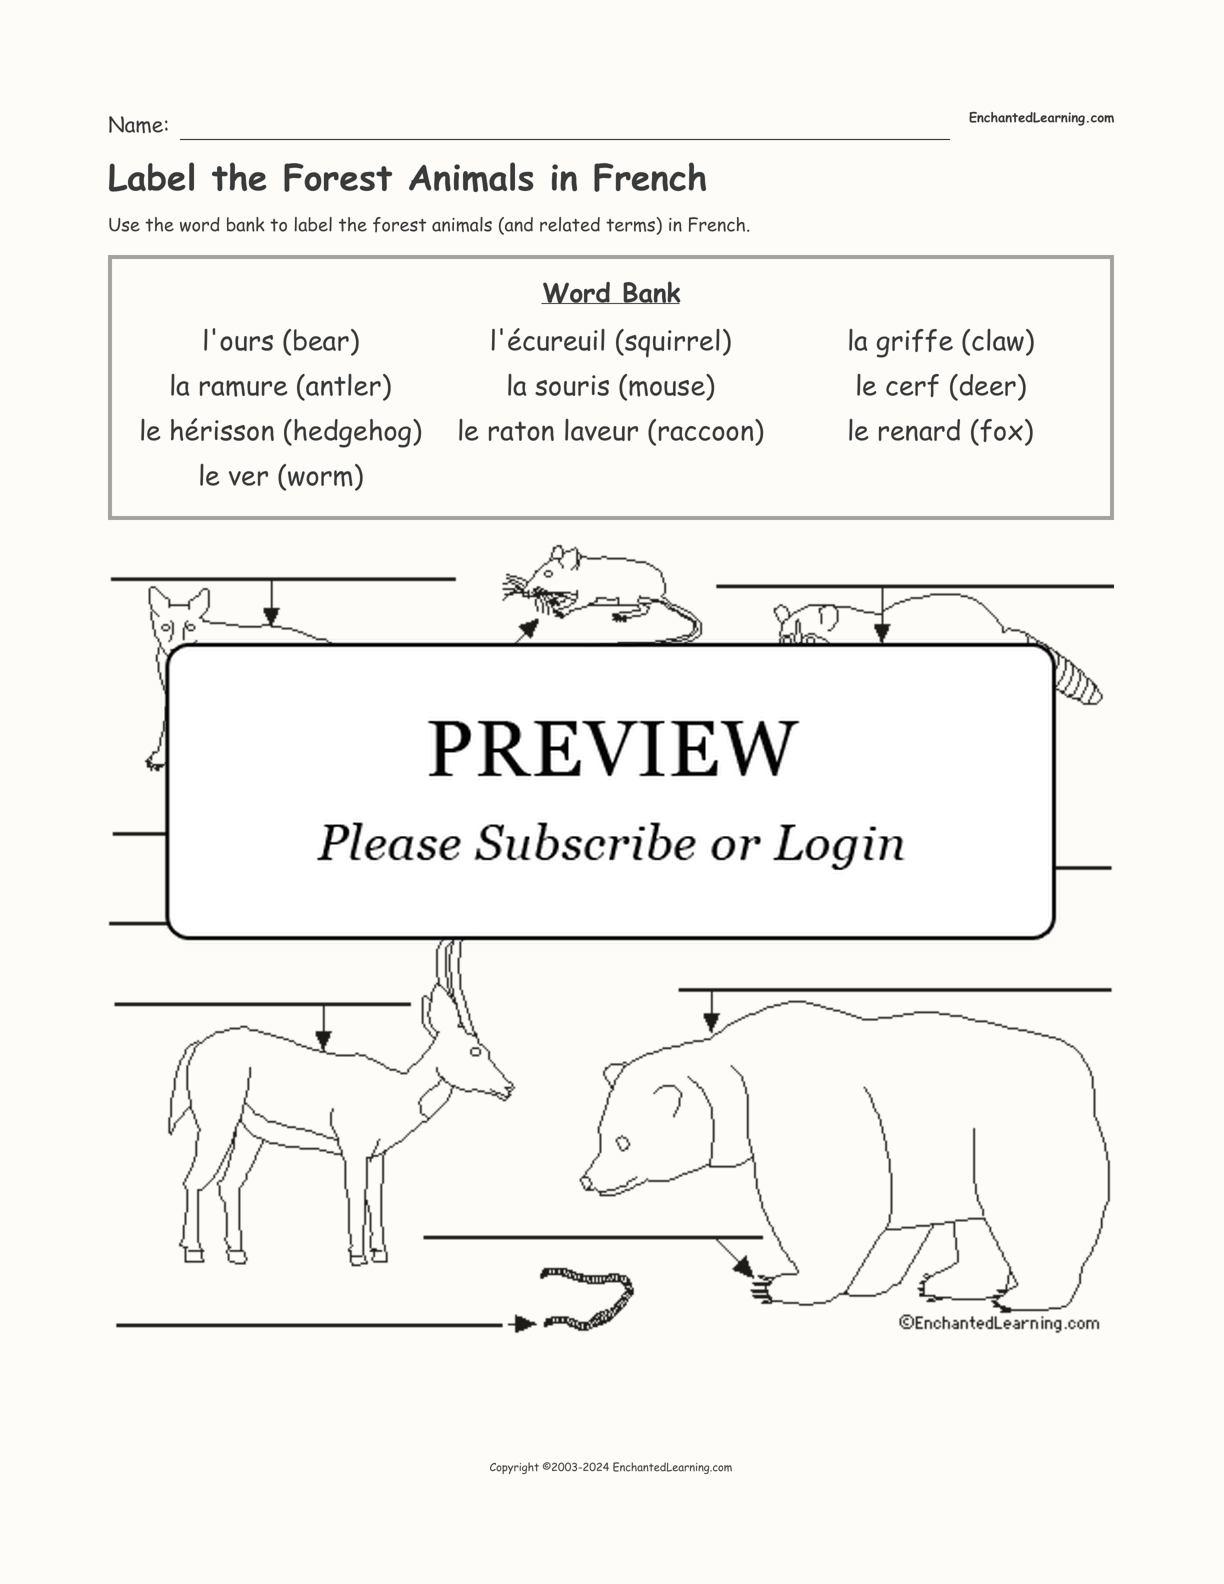 Label the Forest Animals in French interactive worksheet page 1